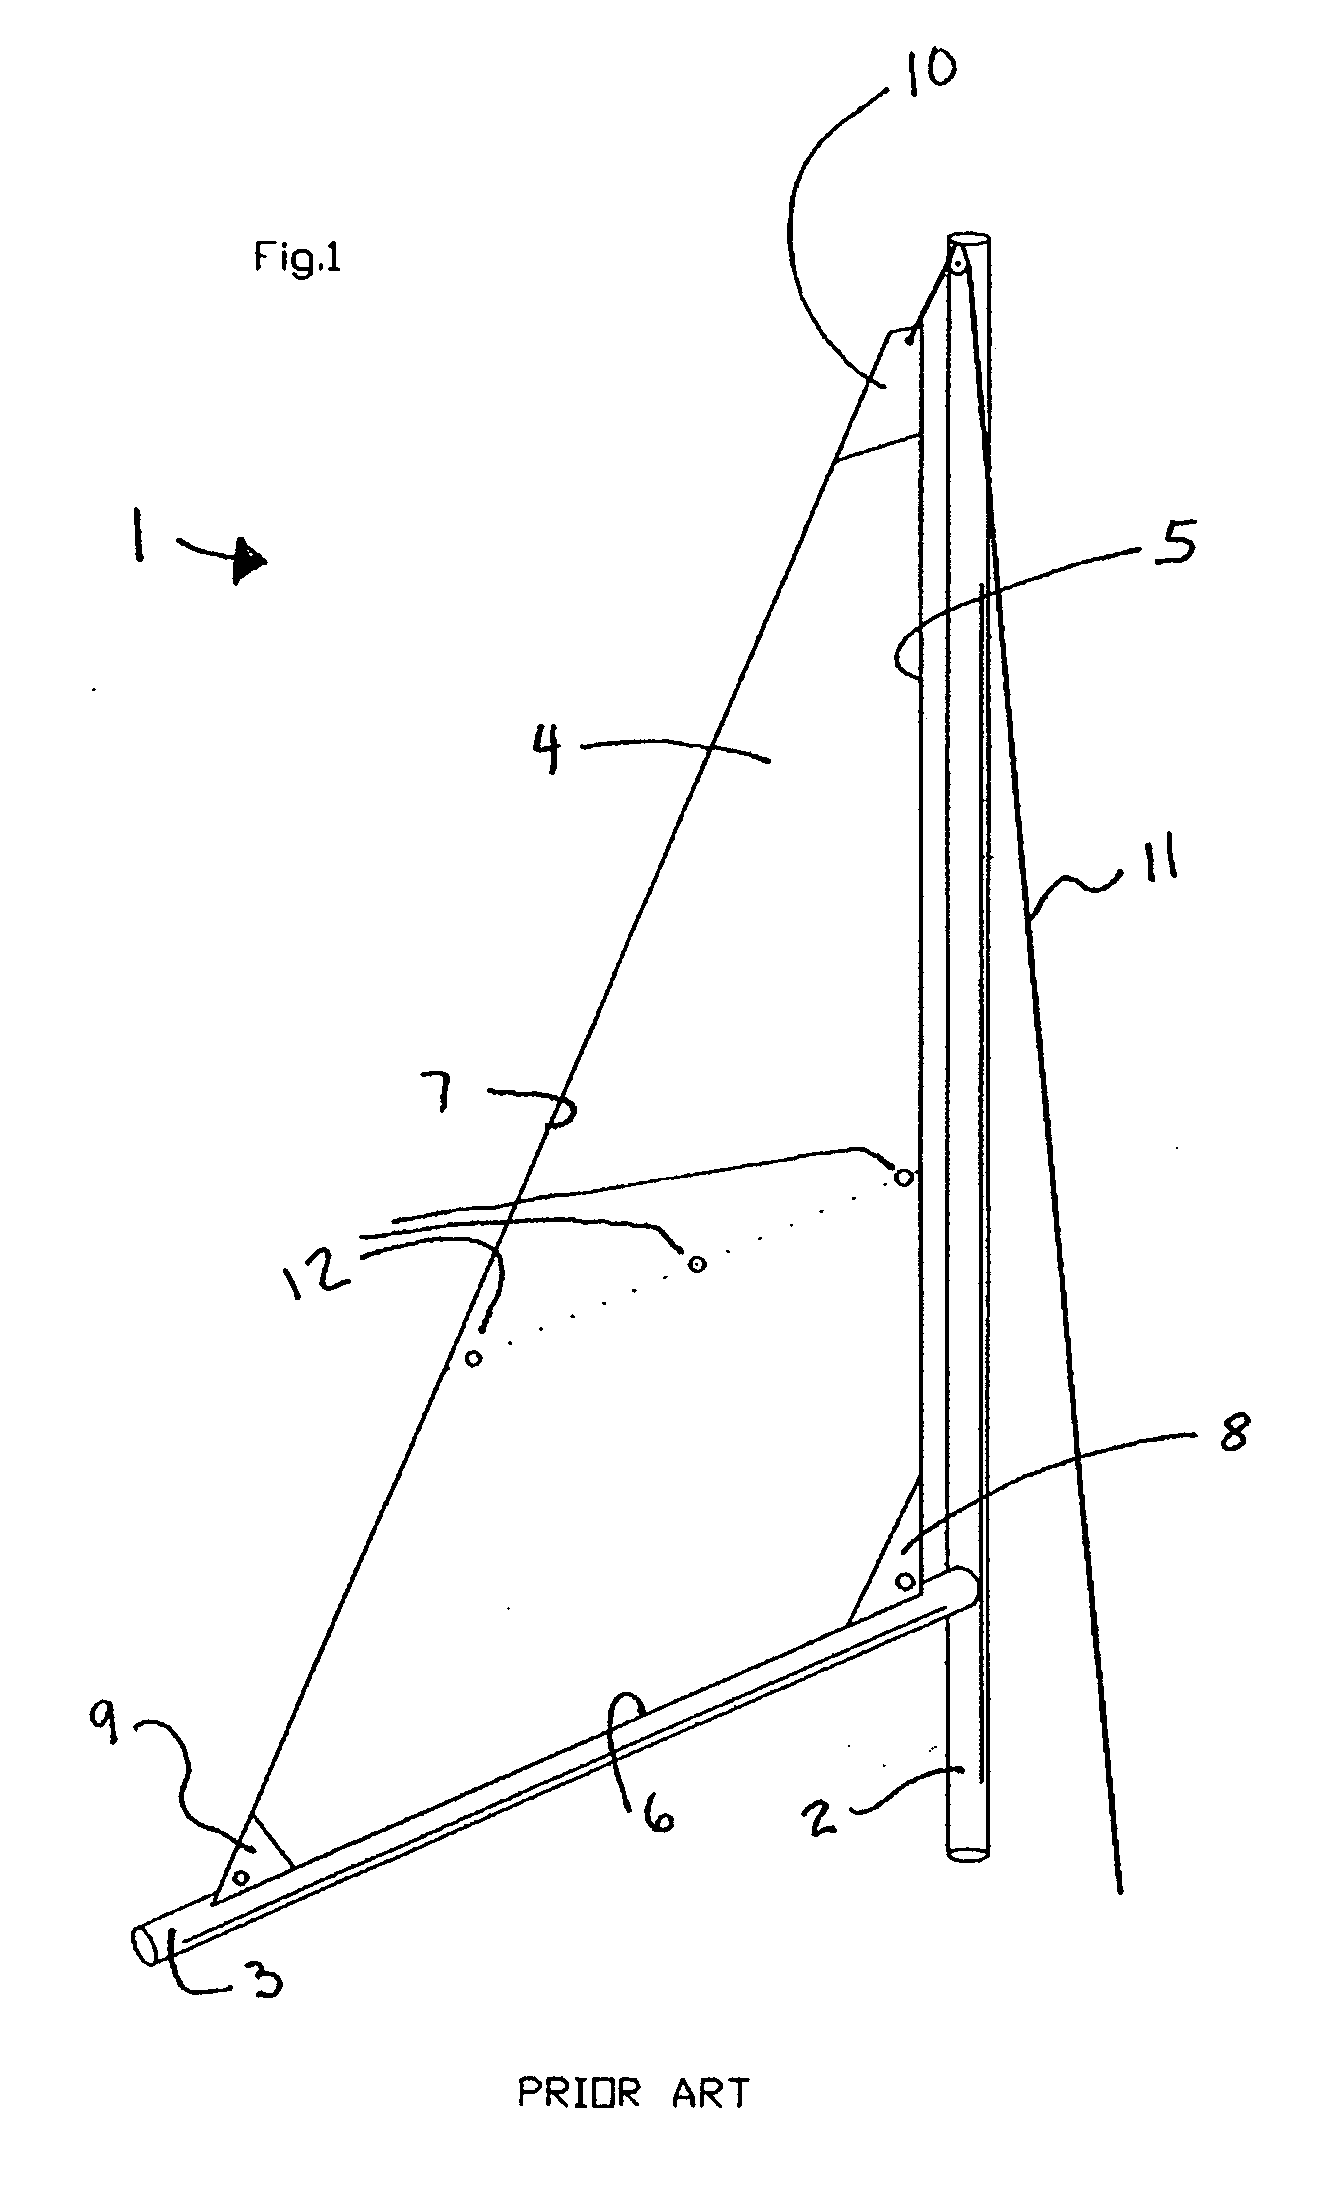 Simple but effective sail handling system that allows sail control to be carried out single-handed from the safety of the cockpit